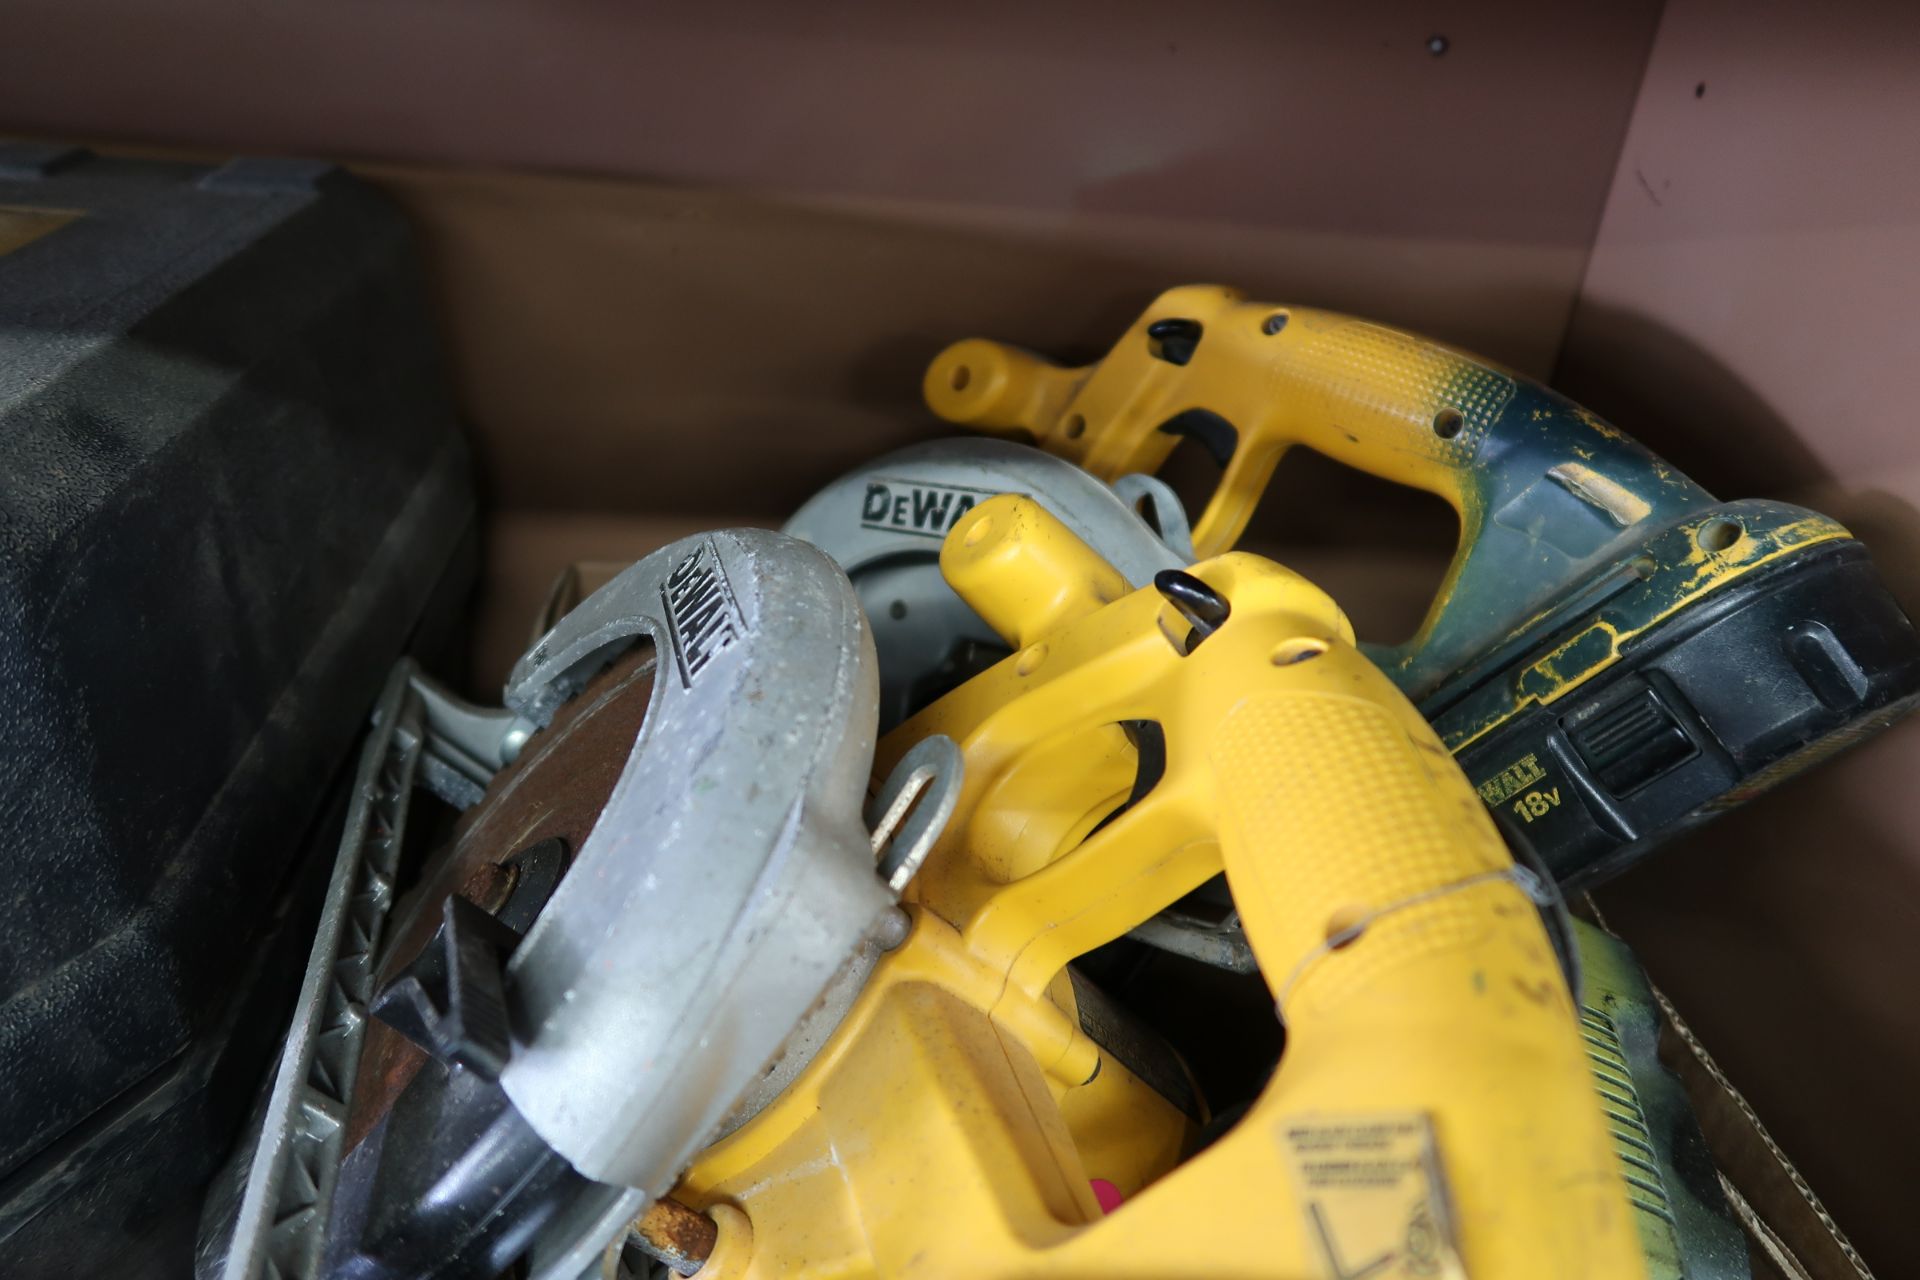 DeWalt 18Volt Cordless Circular Saws (4) (NO CHARGERS OR BATTERIES) (SOLD AS-IS - NO WARRANTY) - Image 5 of 5